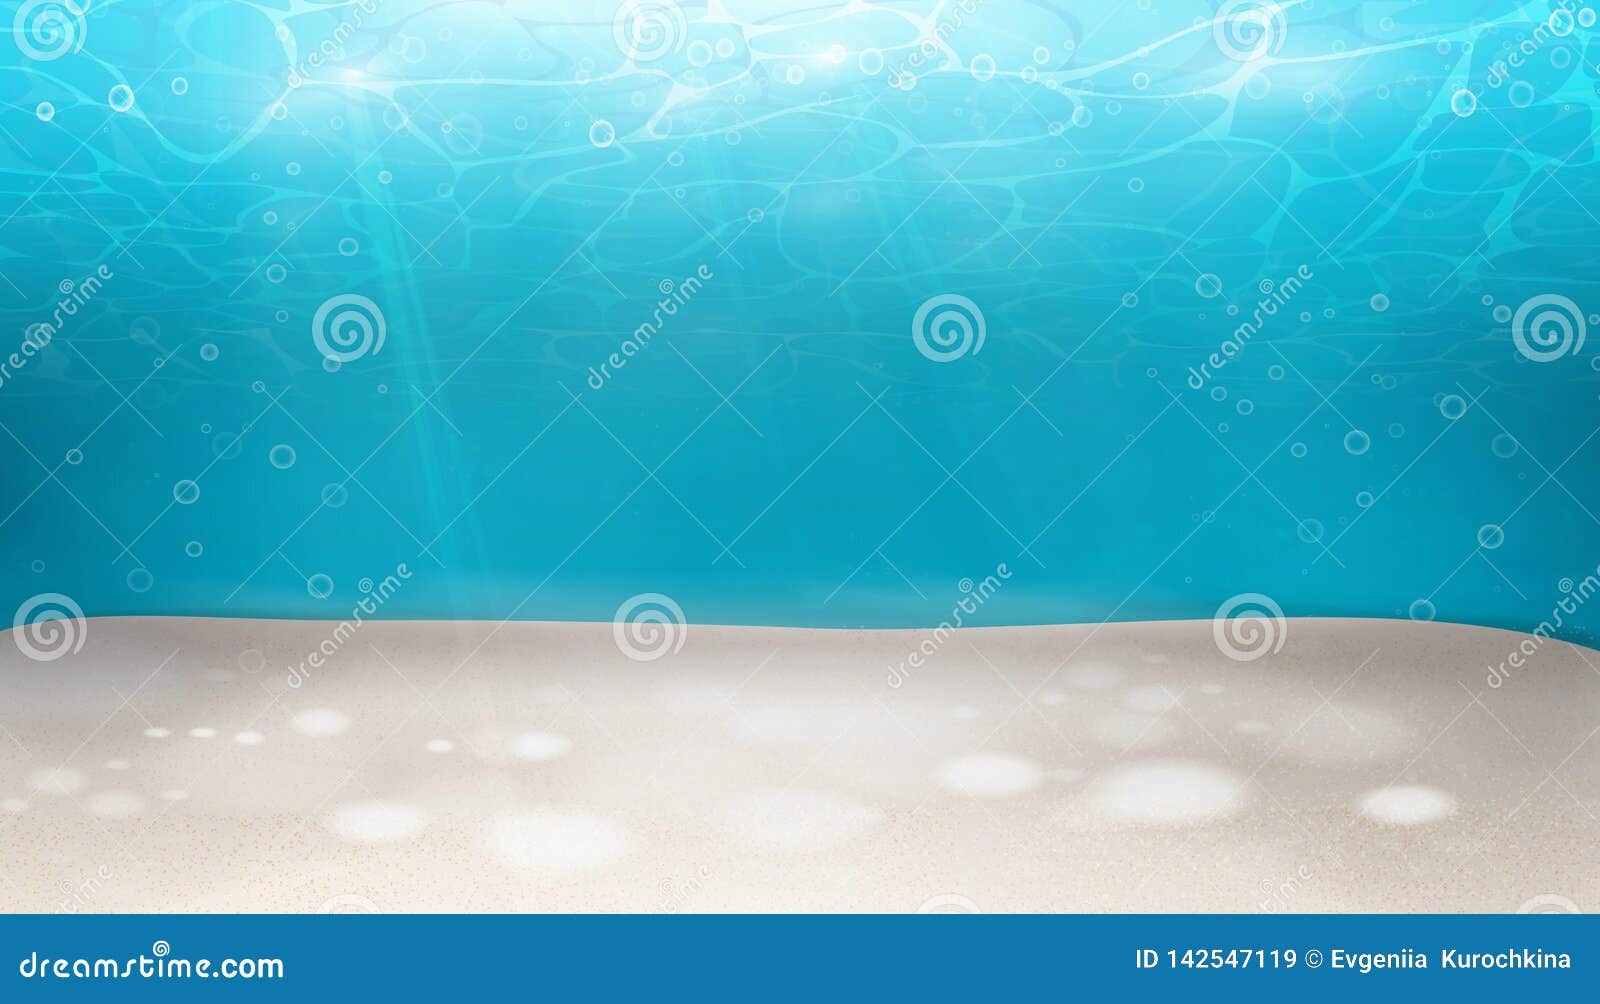 underwater world nature scene background. ocean and sea bottom life with blue water, wave lights, bubbles of air, rays